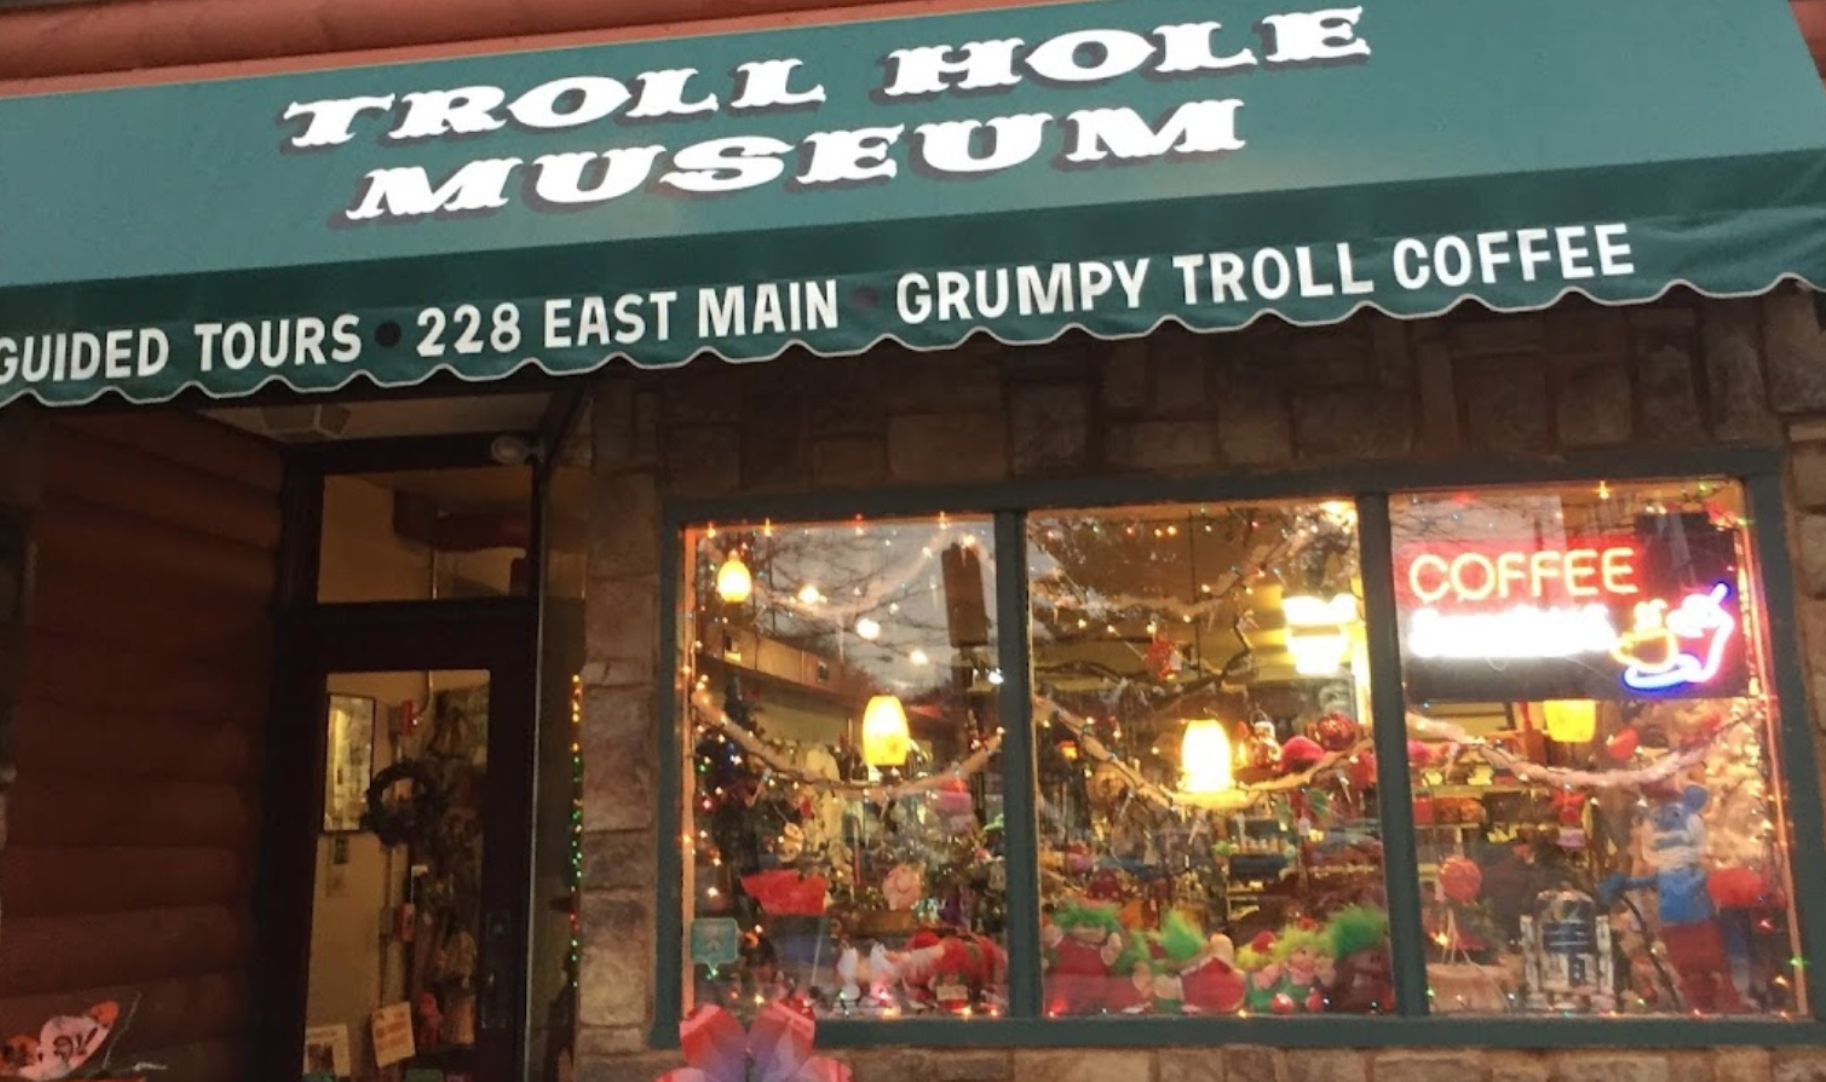 A troll in a stocking is the Troll Hole Museum's version of elf on a shelf,  on December 6, 2017, in Alliance, Ohio. The trolls are placed throughout  the museum for patrons